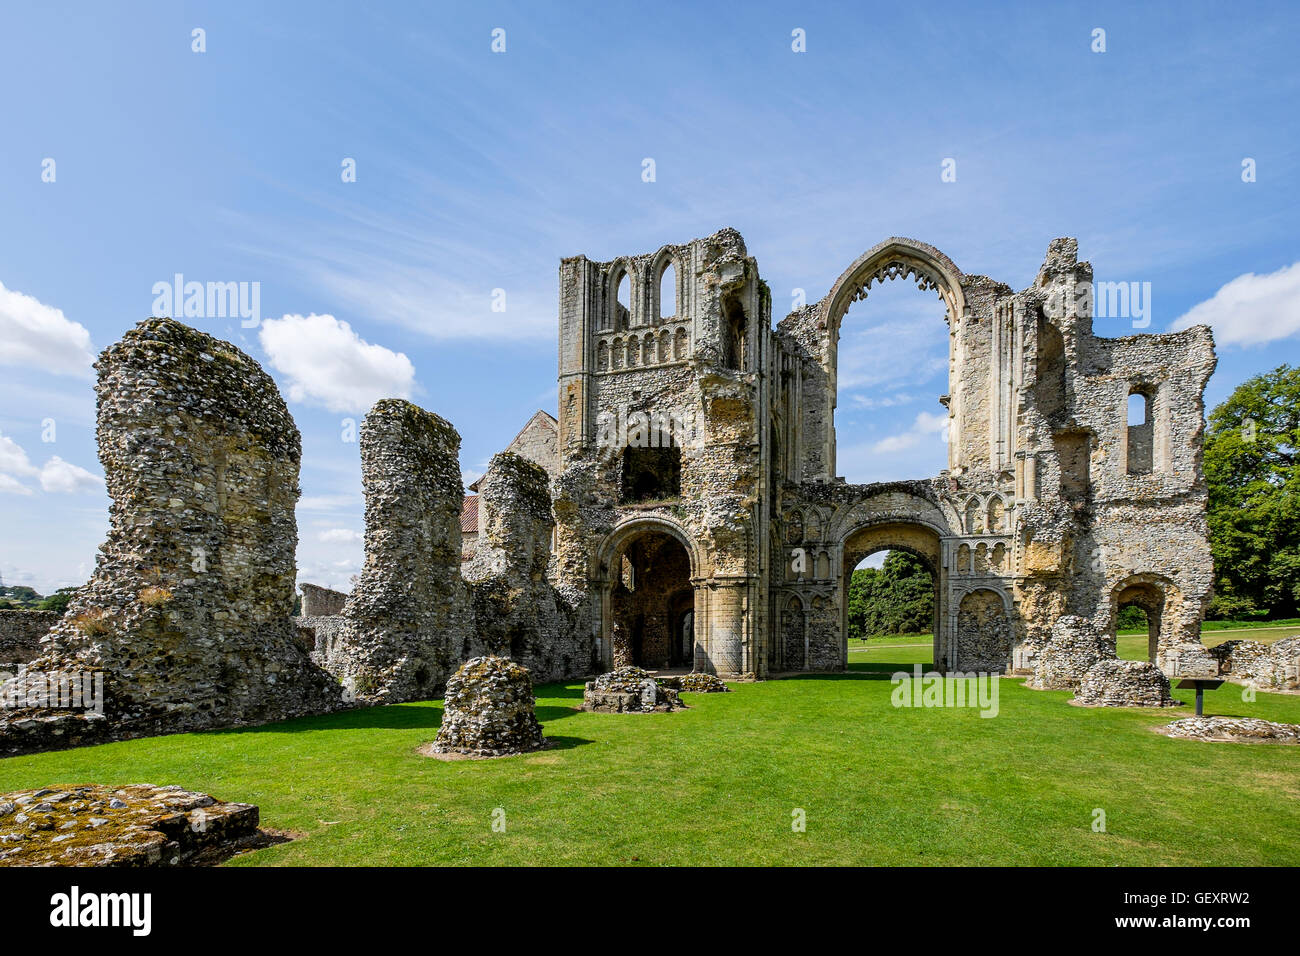 The ruins of Castle Acre Priory on a sunny day. Stock Photo